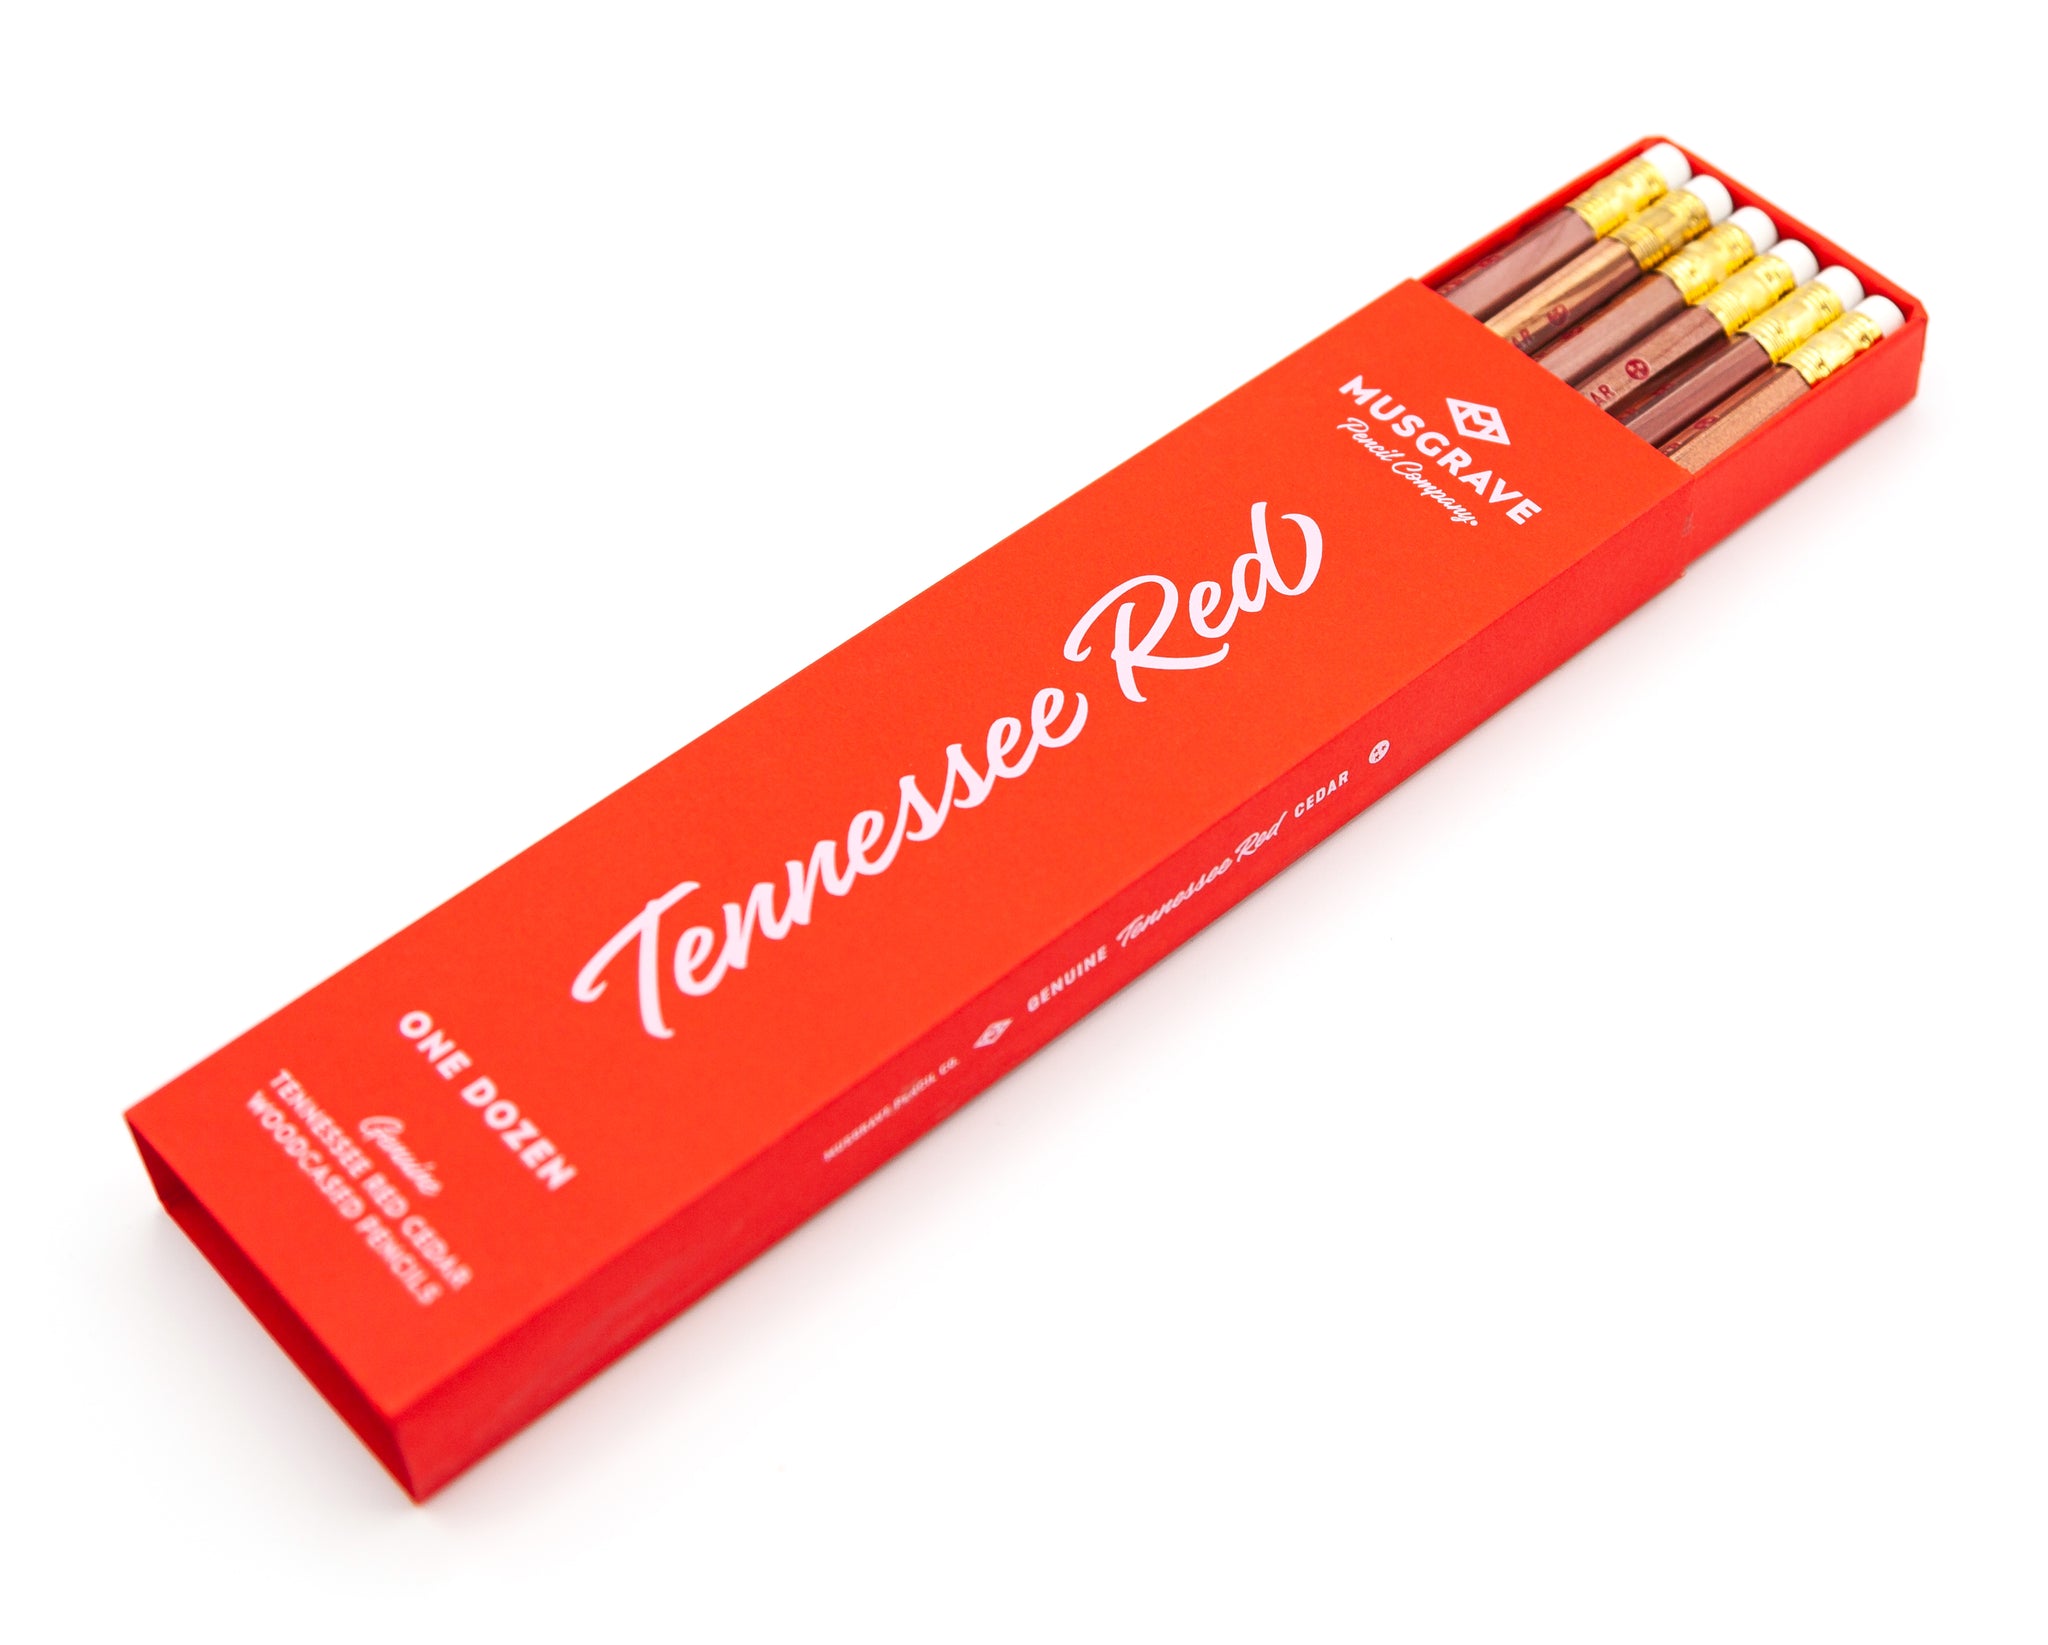 12-pack Tennessee Red Cedar Pencils, Musgrave Pencil Company